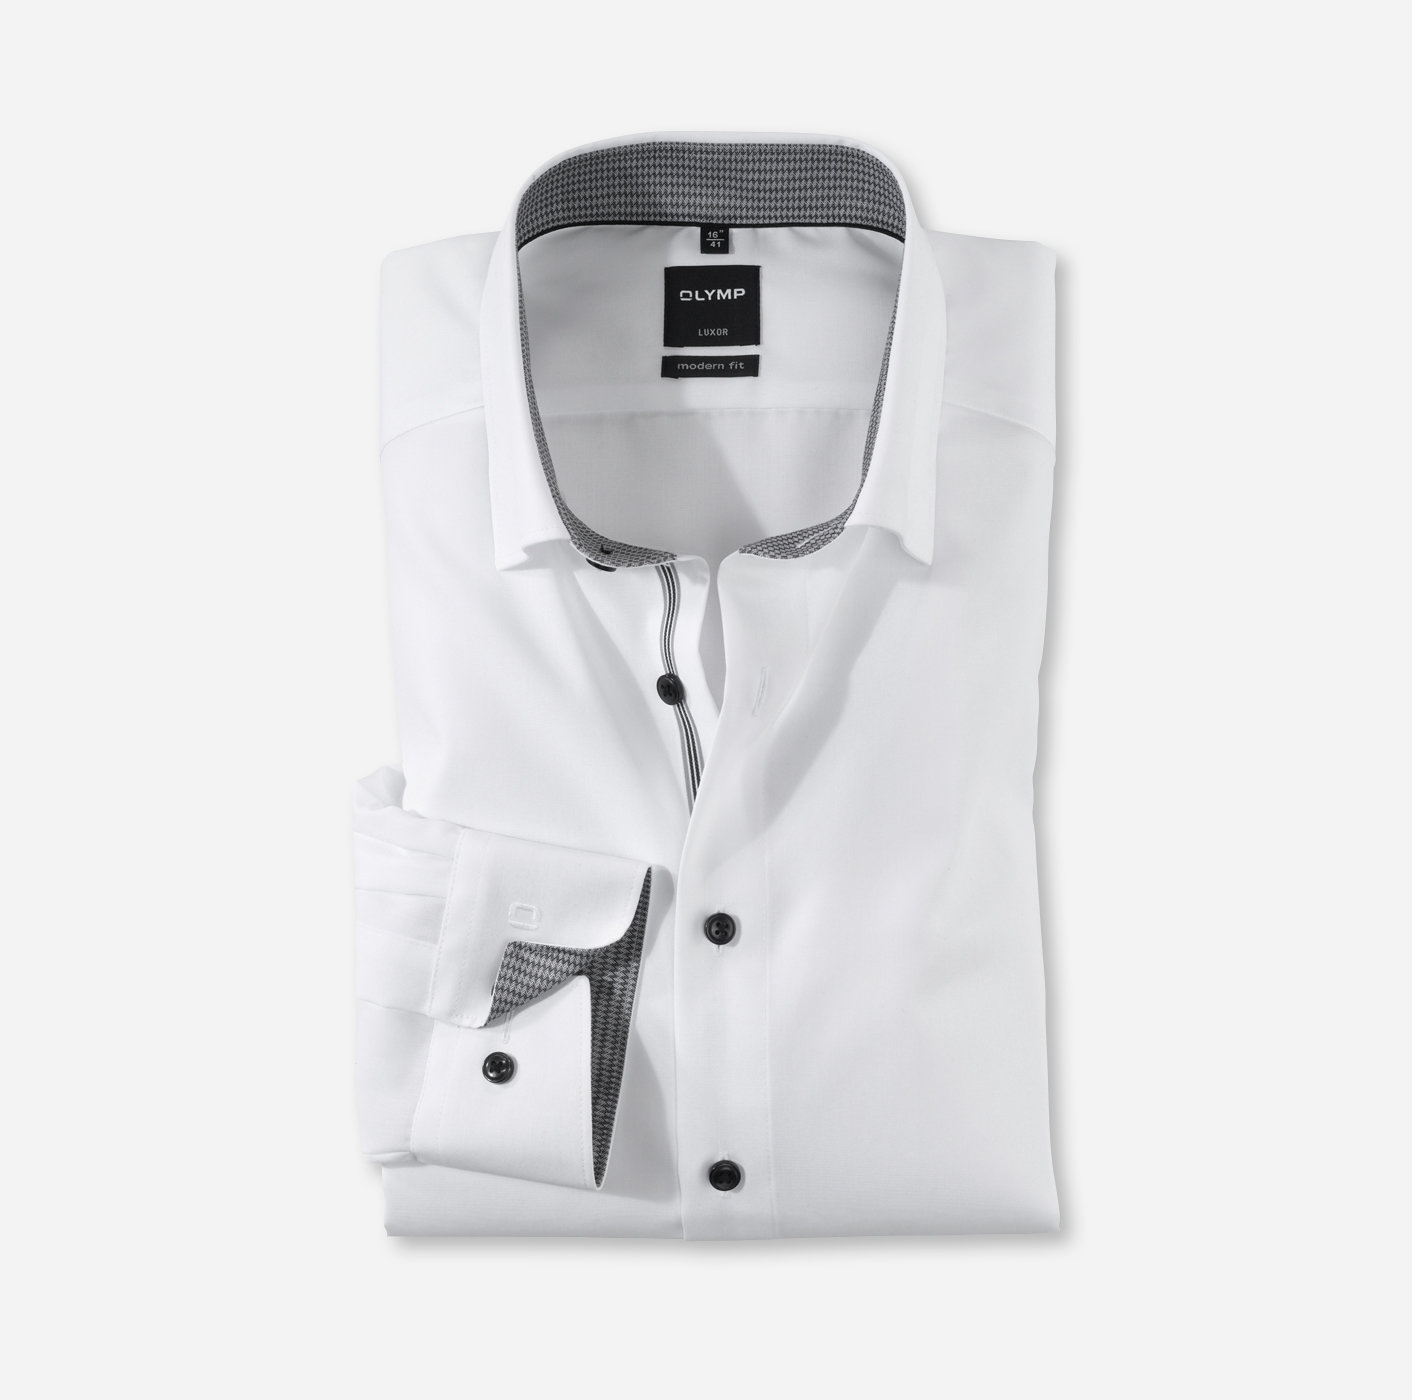 OLYMP Luxor, modern fit, Business shirt, Boutons sous col, Blanc